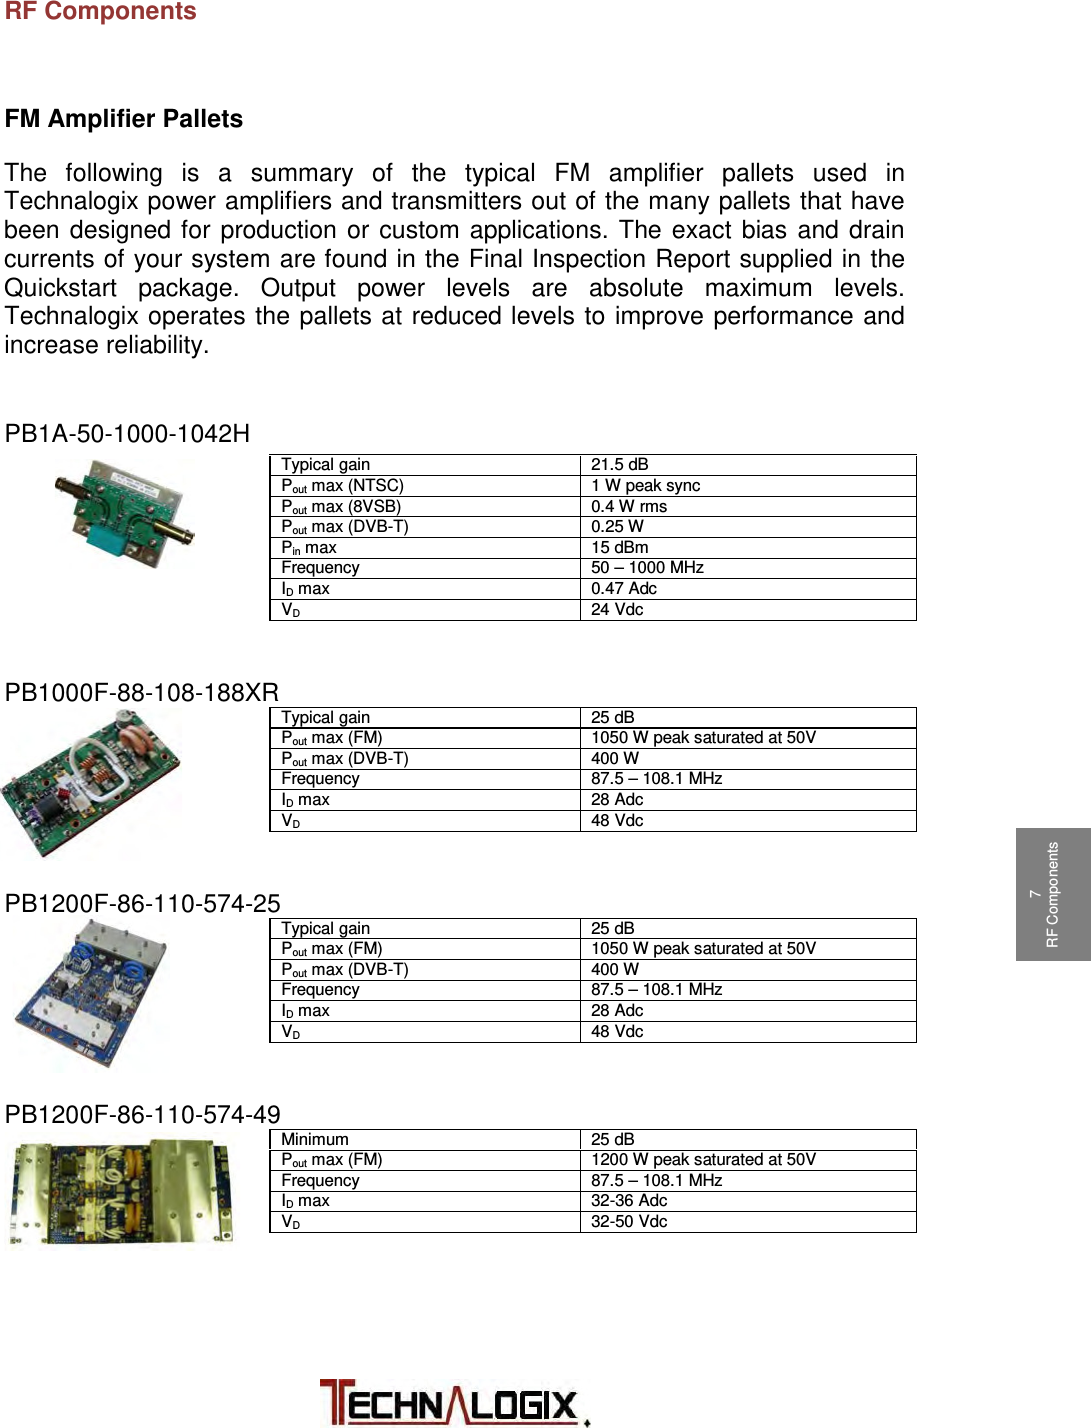           1 Safeguards  2 Terms and Warranty 3 Principle of Operation 4 Installation 5 Operation 6 Control System 7 RF Components 7 RF Components 9 Maintenance 10 Troubleshooting  RF Components  FM Amplifier Pallets The following is a summary of the typical  FM  amplifier pallets used in Technalogix power amplifiers and transmitters out of the many pallets that have been designed for production or custom applications. The exact bias and drain currents of your system are found in the Final Inspection Report supplied in the Quickstart  package. Output power levels are absolute maximum levels. Technalogix operates the pallets at reduced levels to improve performance and increase reliability.  PB1A-50-1000-1042H Typical gain 21.5 dB Pout max (NTSC) 1 W peak sync Pout max (8VSB) 0.4 W rms Pout max (DVB-T) 0.25 W Pin max 15 dBm Frequency 50 – 1000 MHz ID max 0.47 Adc VD 24 Vdc   PB1000F-88-108-188XR Typical gain 25 dB Pout max (FM) 1050 W peak saturated at 50V Pout max (DVB-T) 400 W Frequency 87.5 – 108.1 MHz ID max 28 Adc VD 48 Vdc   PB1200F-86-110-574-25 Typical gain 25 dB Pout max (FM) 1050 W peak saturated at 50V Pout max (DVB-T) 400 W Frequency 87.5 – 108.1 MHz ID max 28 Adc VD 48 Vdc   PB1200F-86-110-574-49 Minimum 25 dB Pout max (FM) 1200 W peak saturated at 50V Frequency 87.5 – 108.1 MHz ID max 32-36 Adc VD 32-50 Vdc    